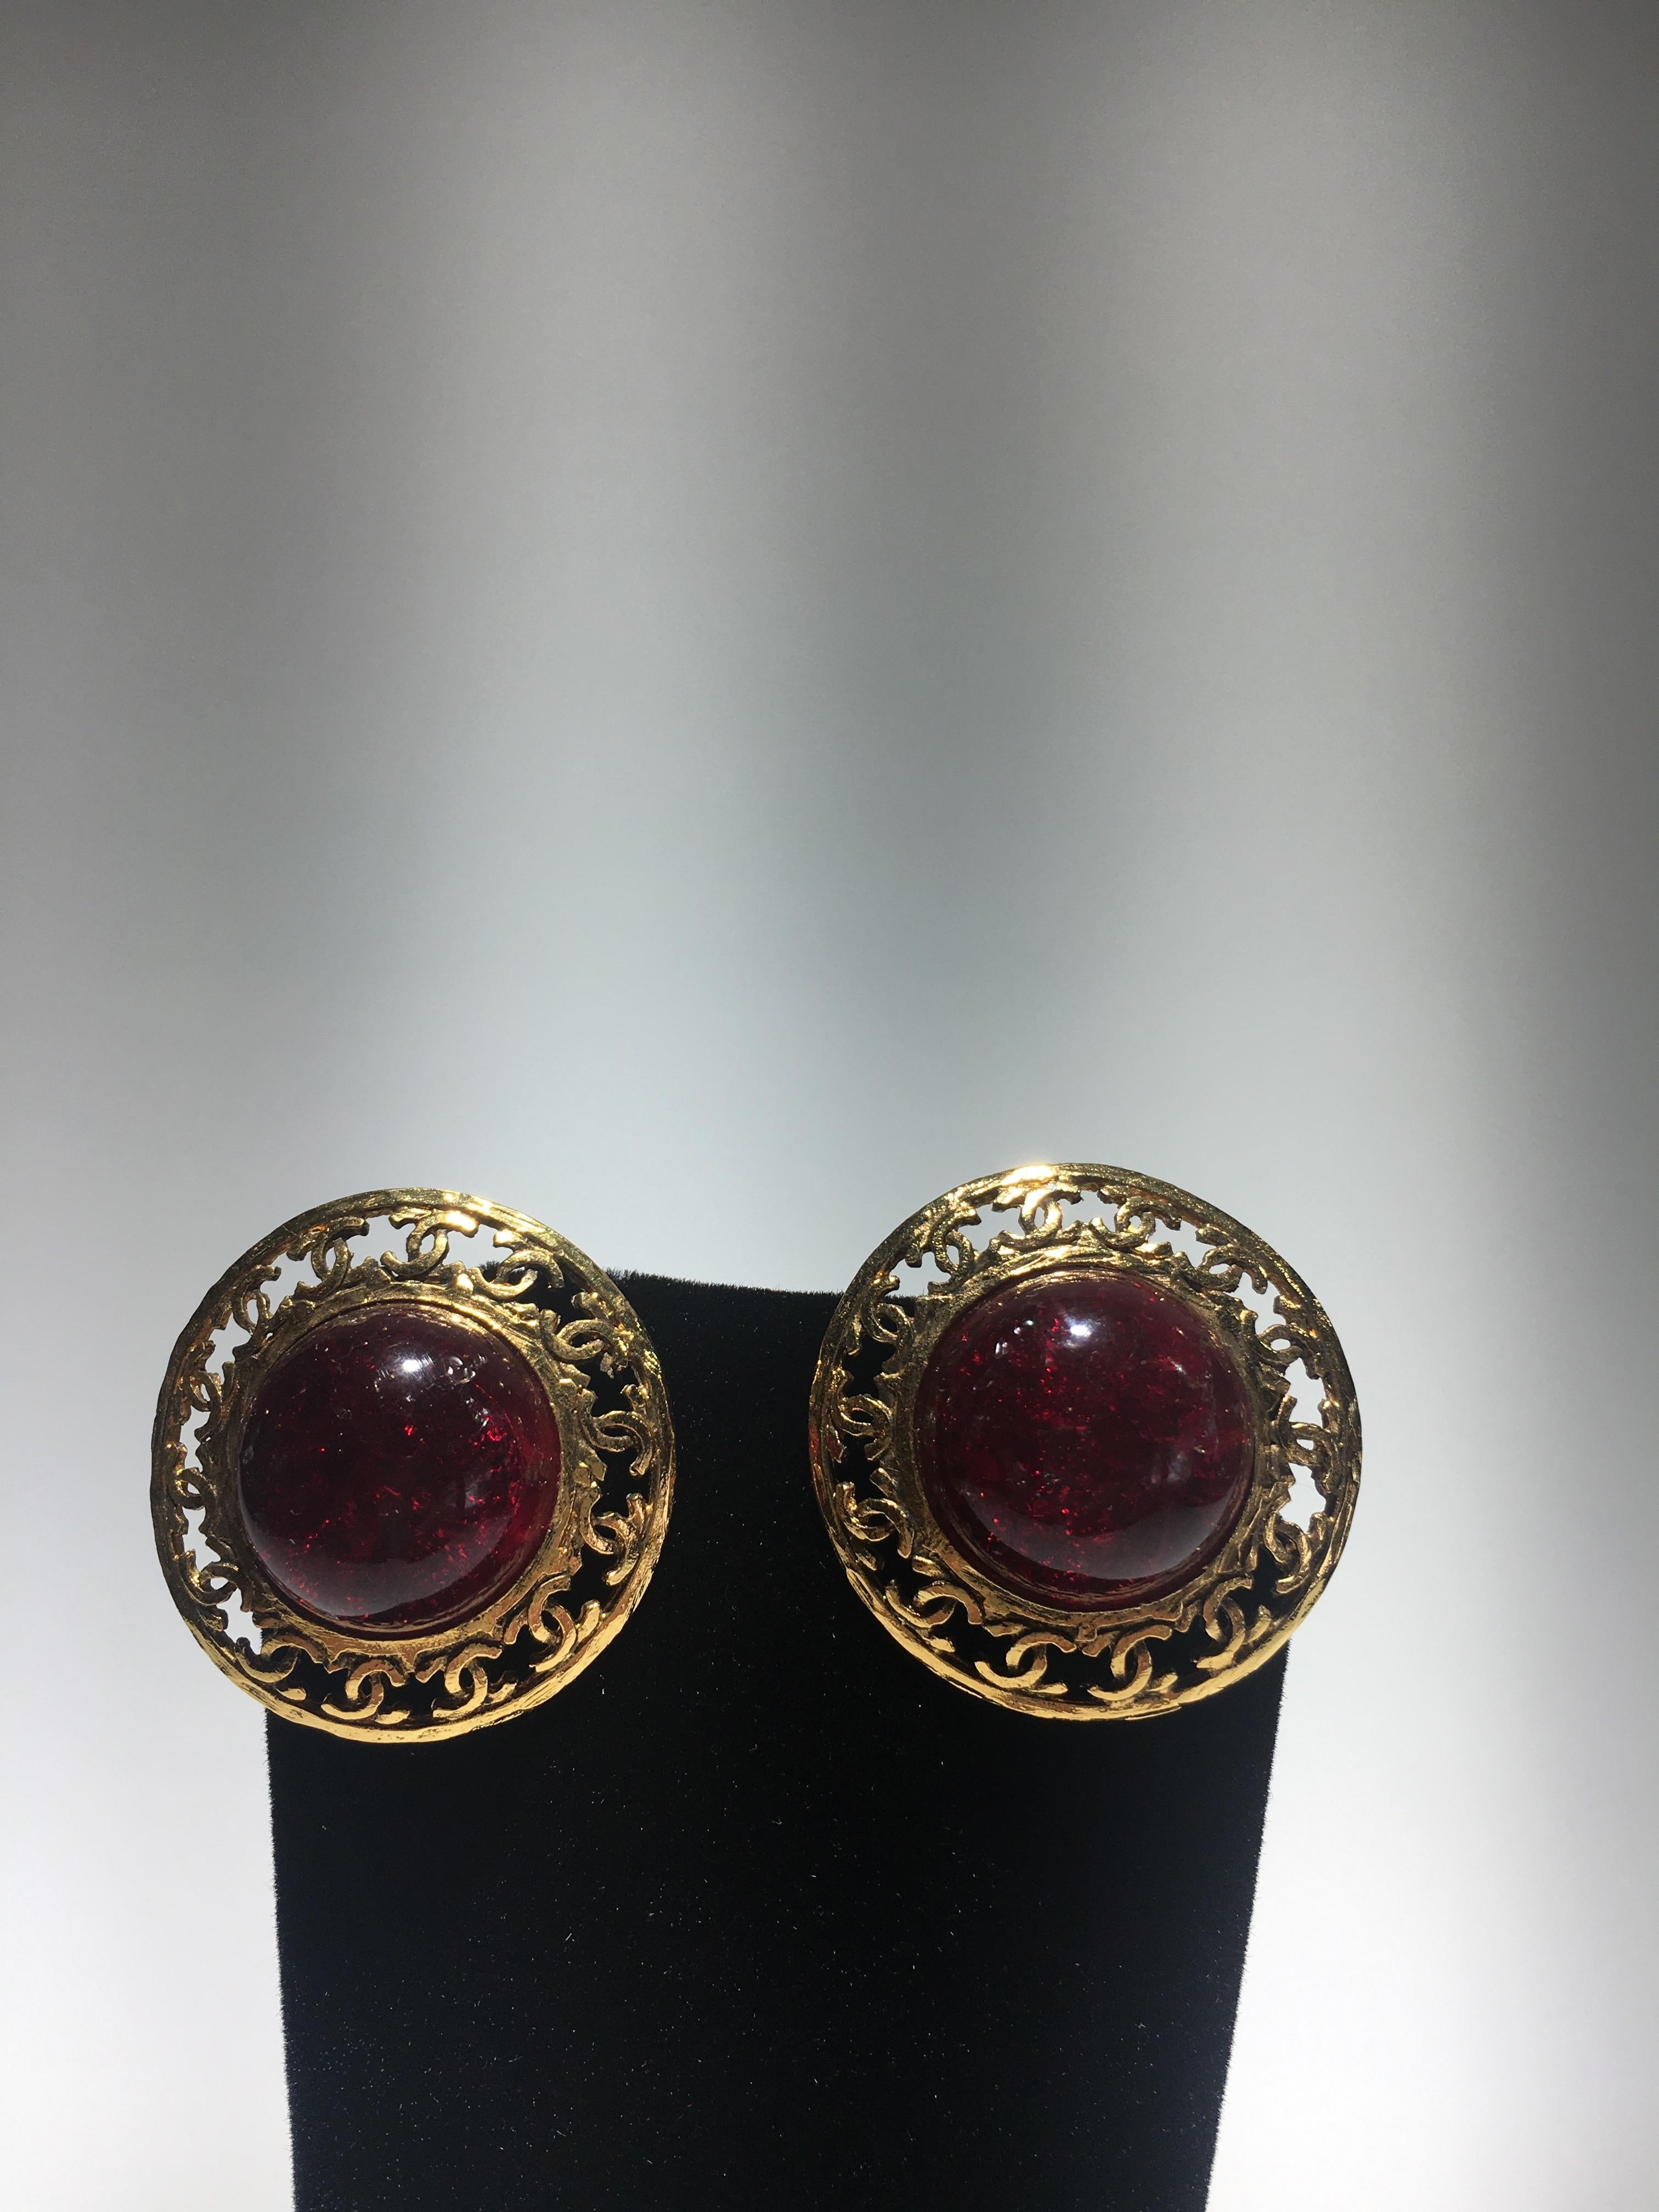 Chanel red poured glass, gripoix, and gold cc metal clip on earrings. They come with original box.  Stones have internal inclusions to appear to be natural stones.